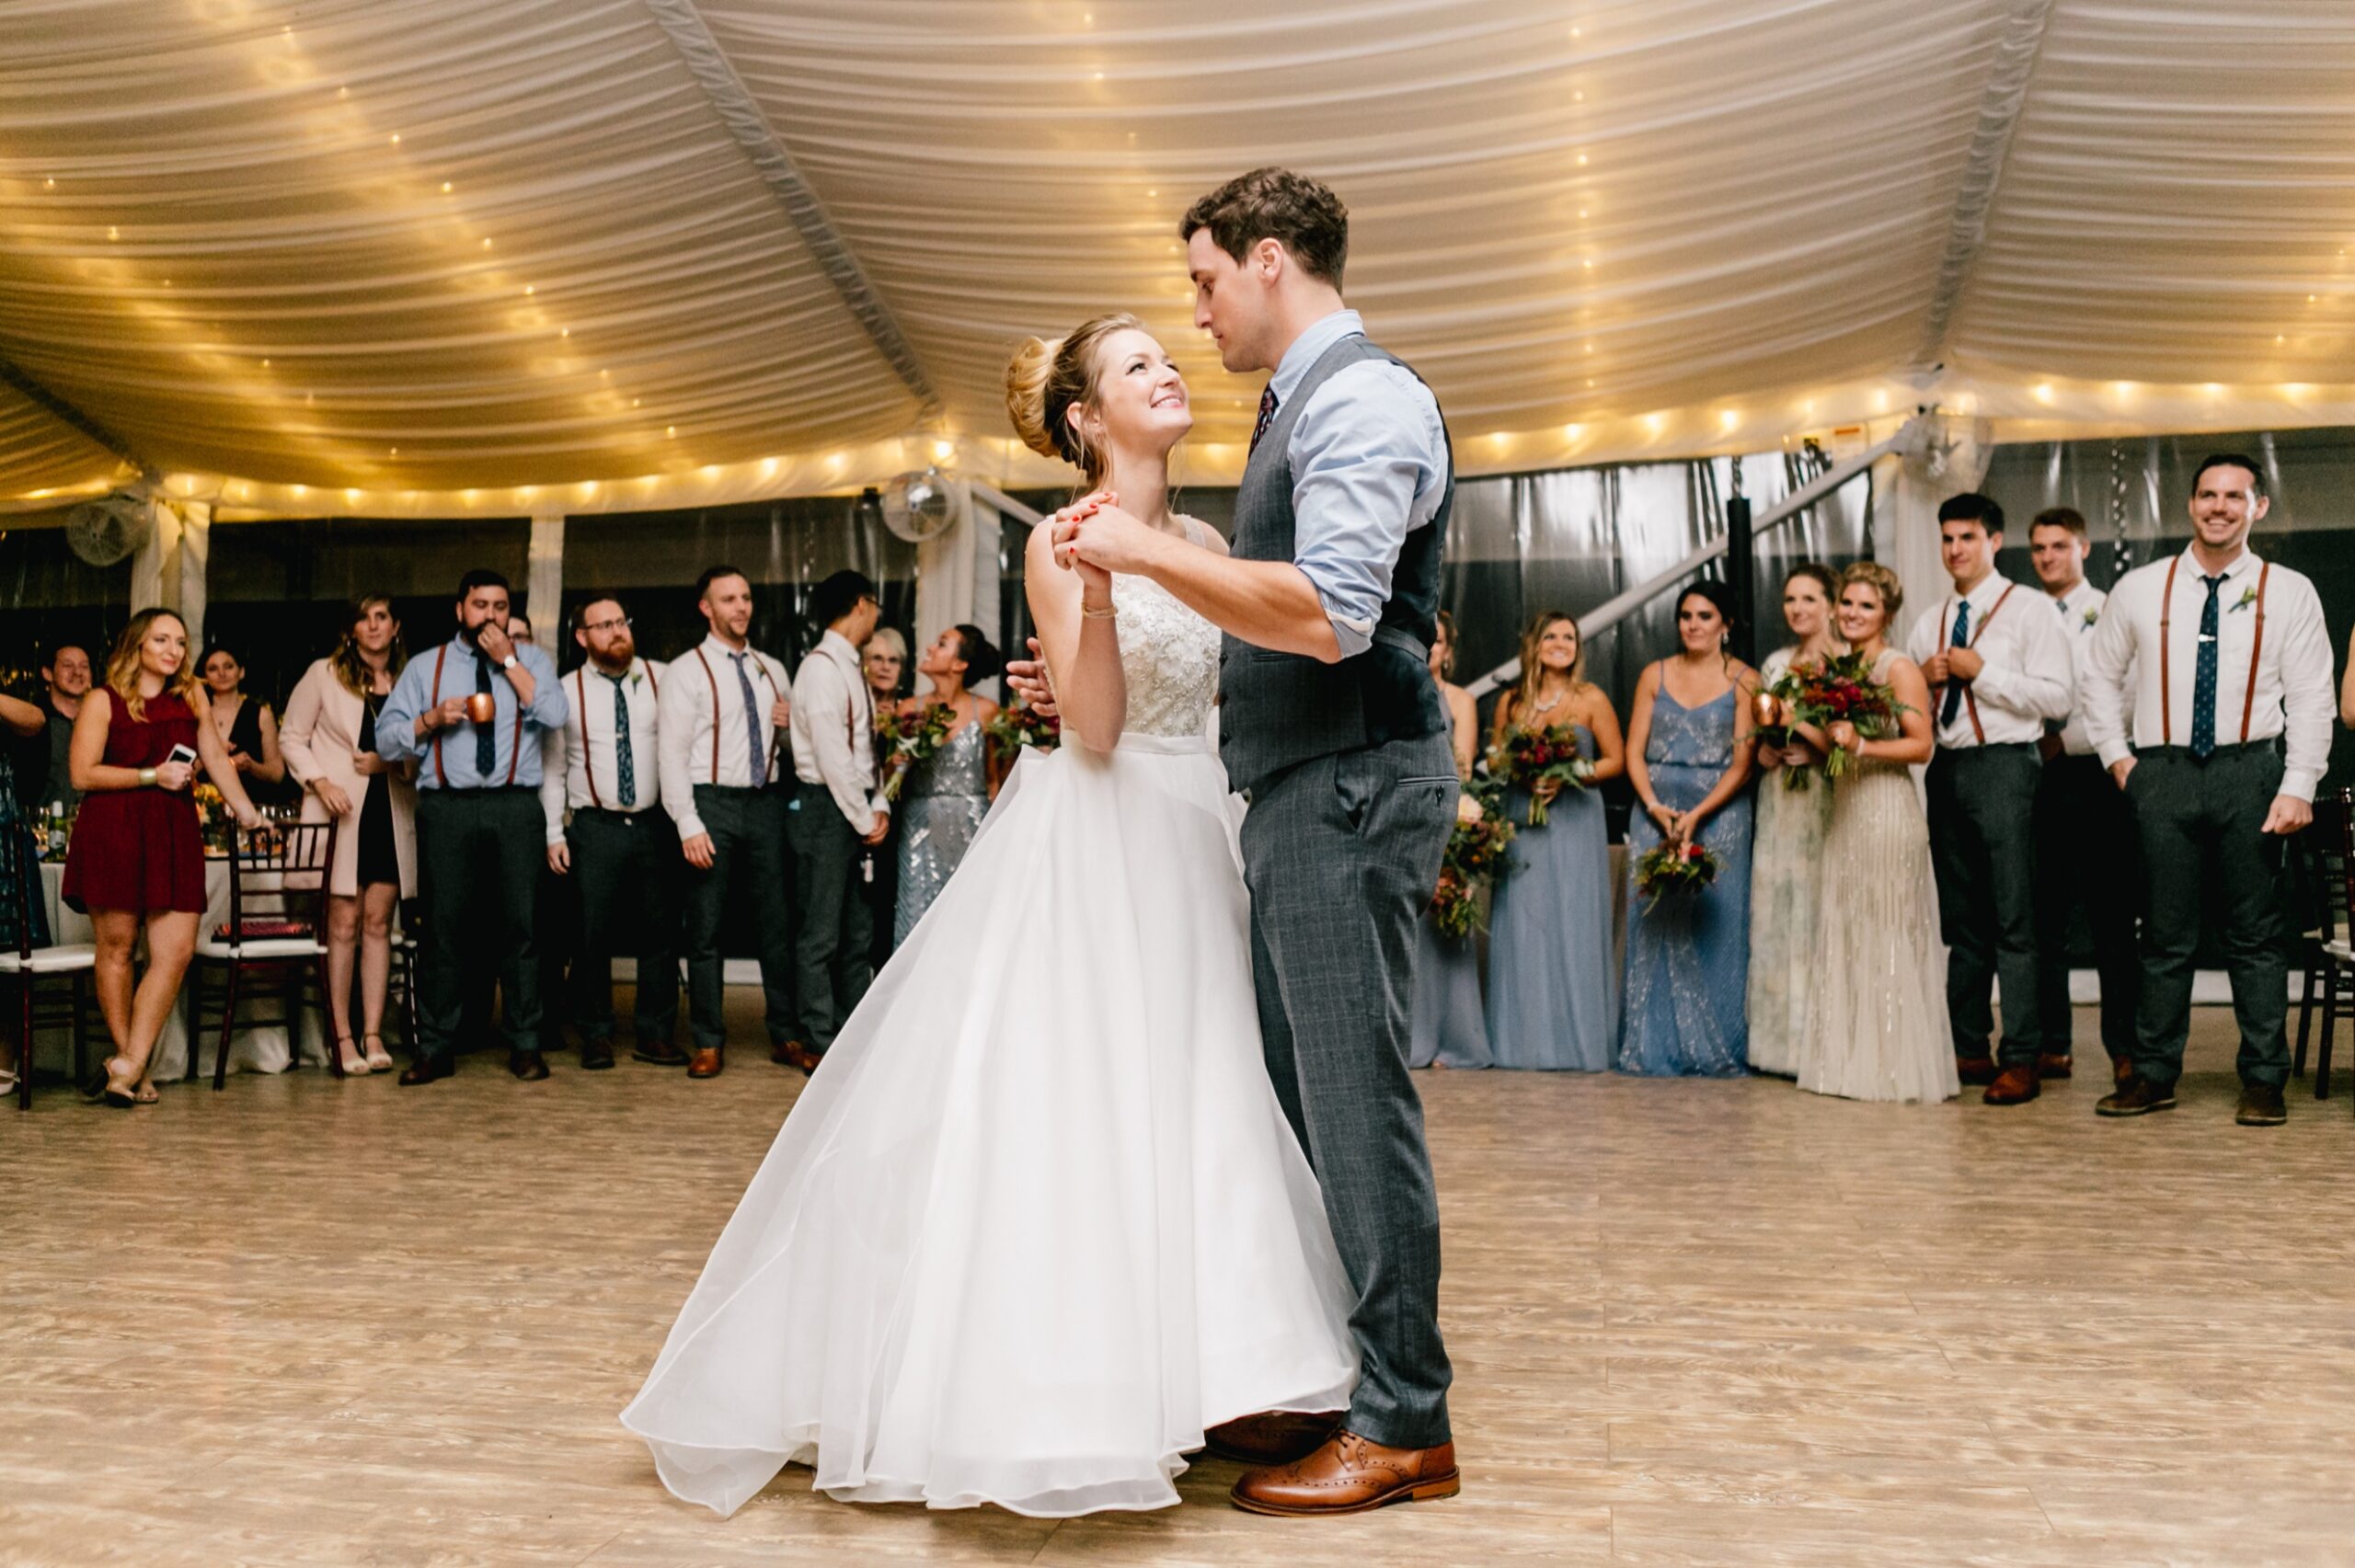 Bride and groom's first dance at a tented reception with twinkle lights